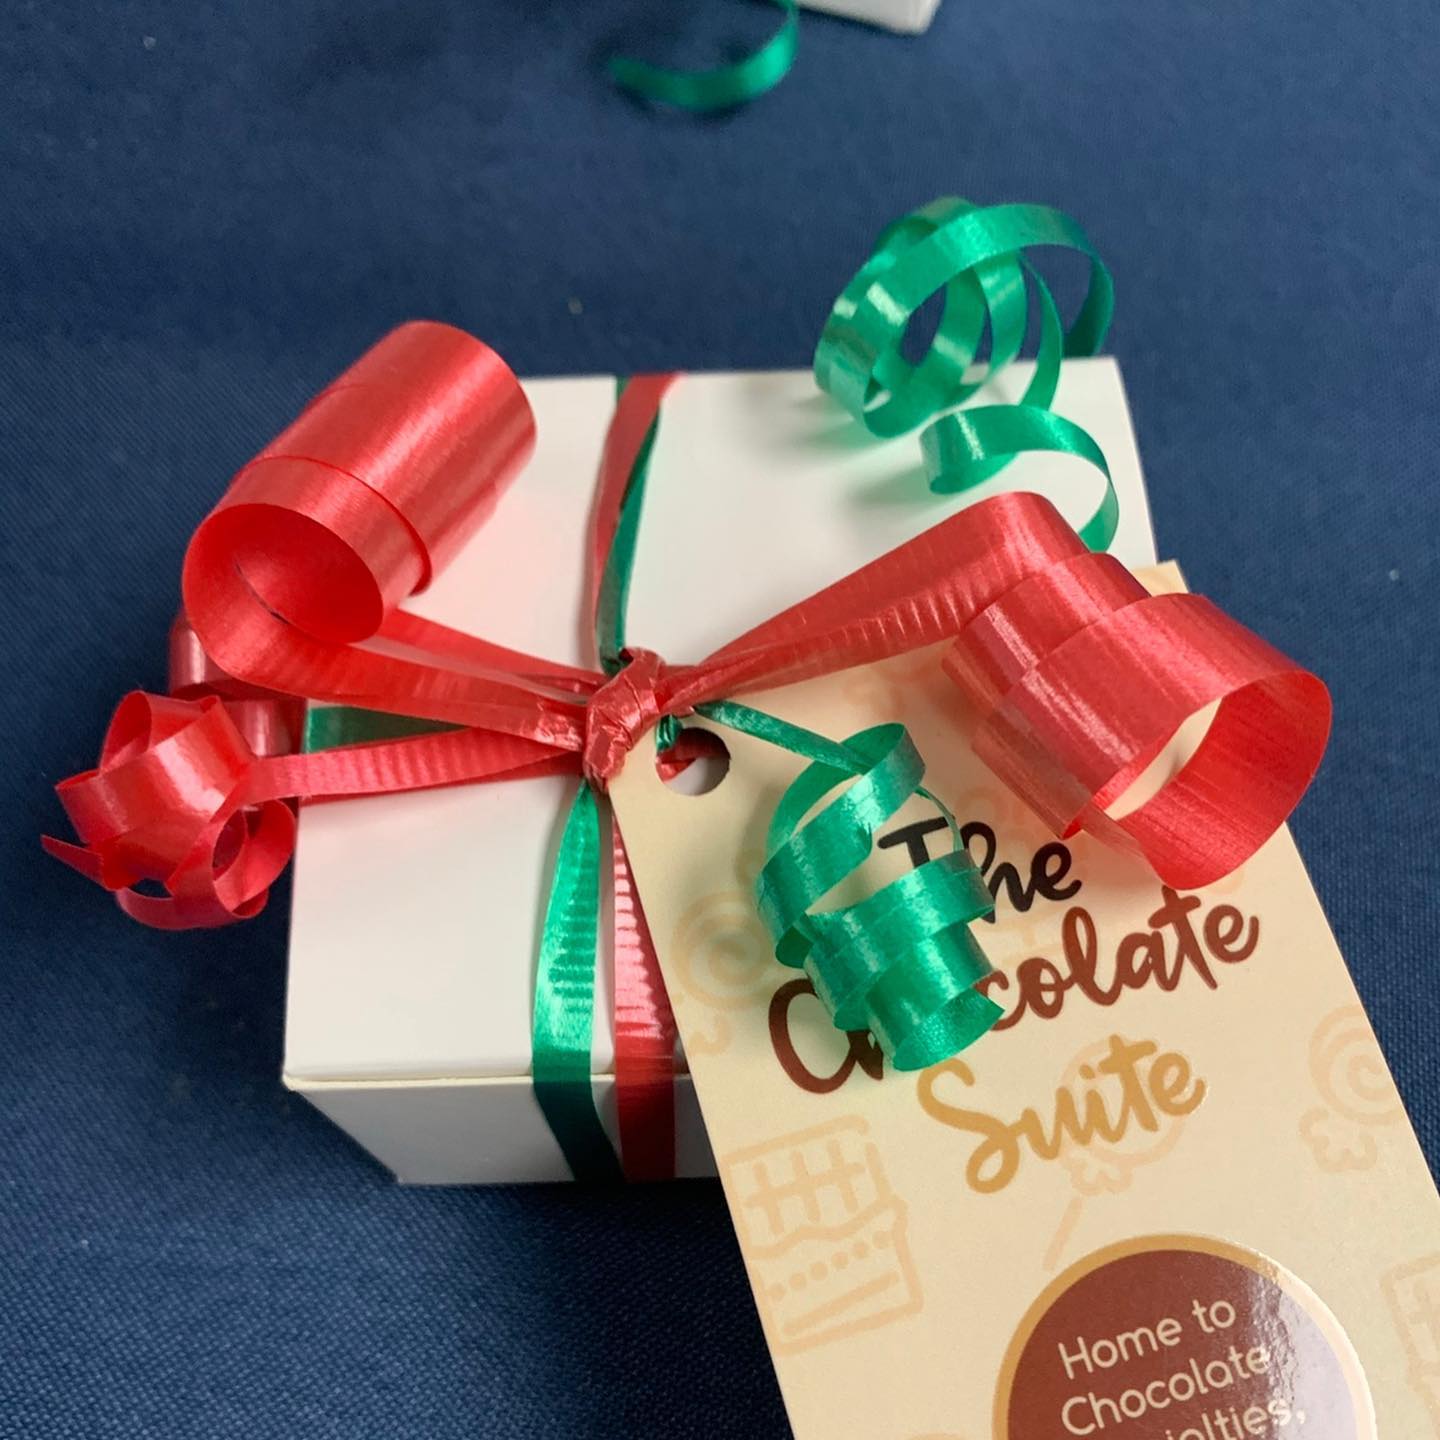 The Chocolate Suite Holiday Gift